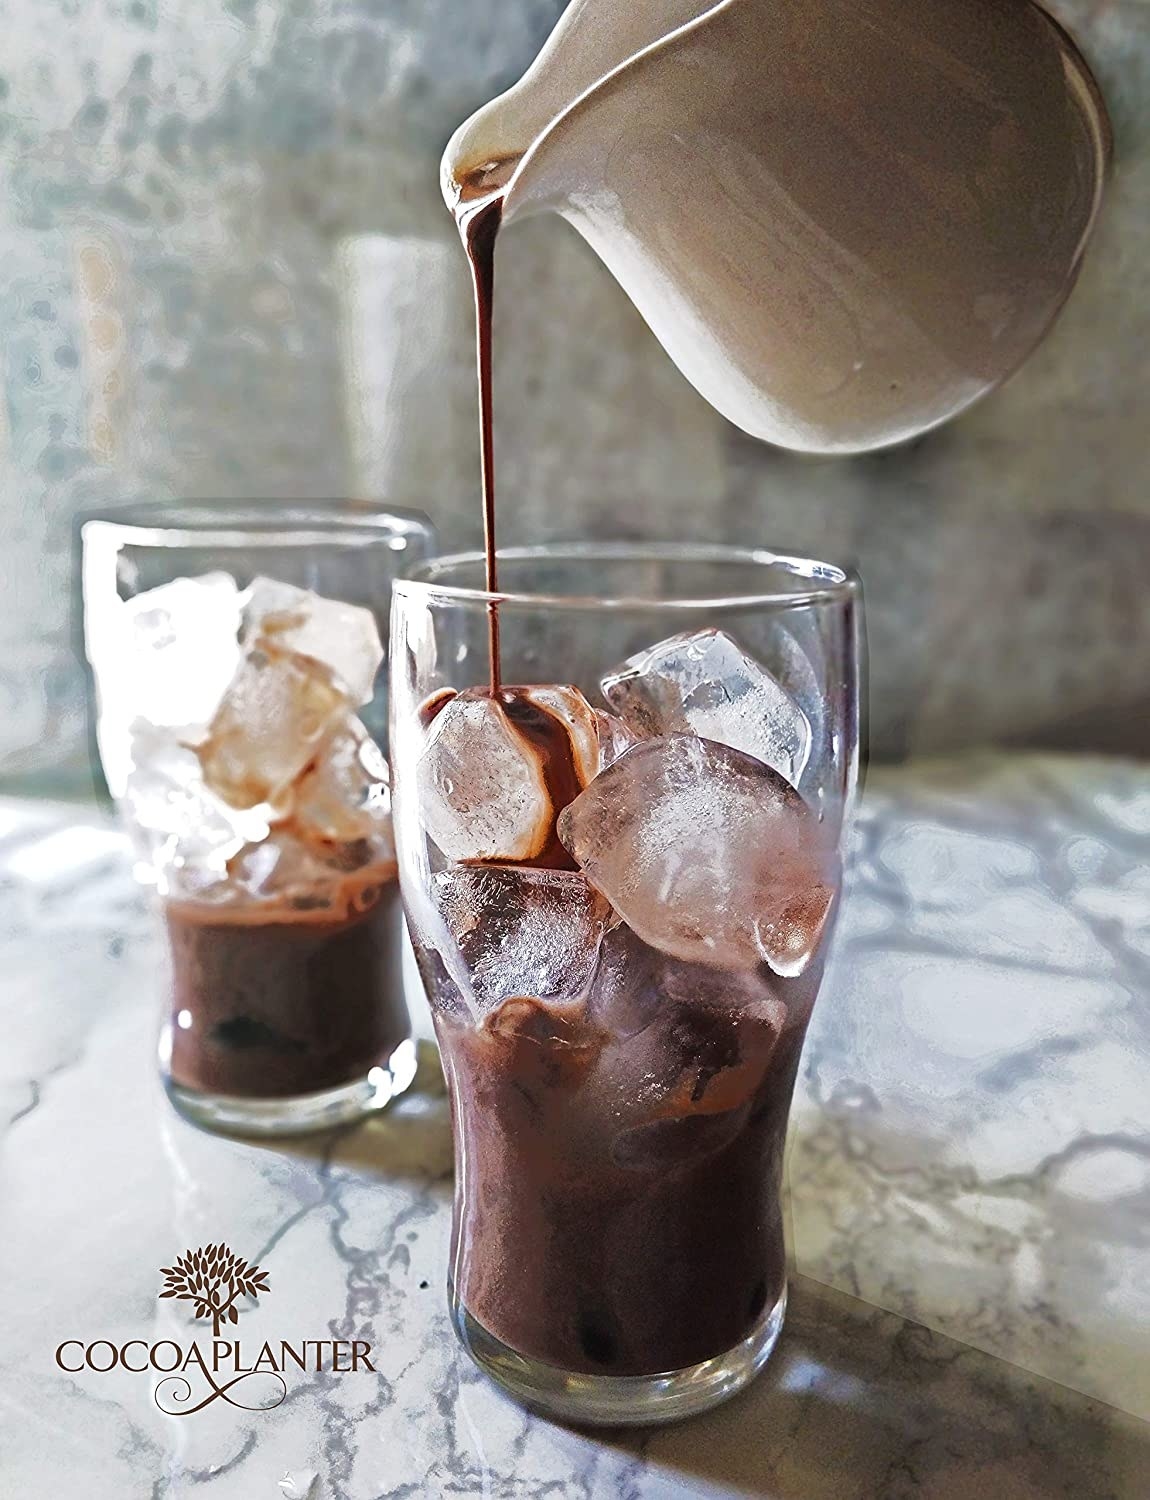 The cocoa mix being poured over ice in a glass.